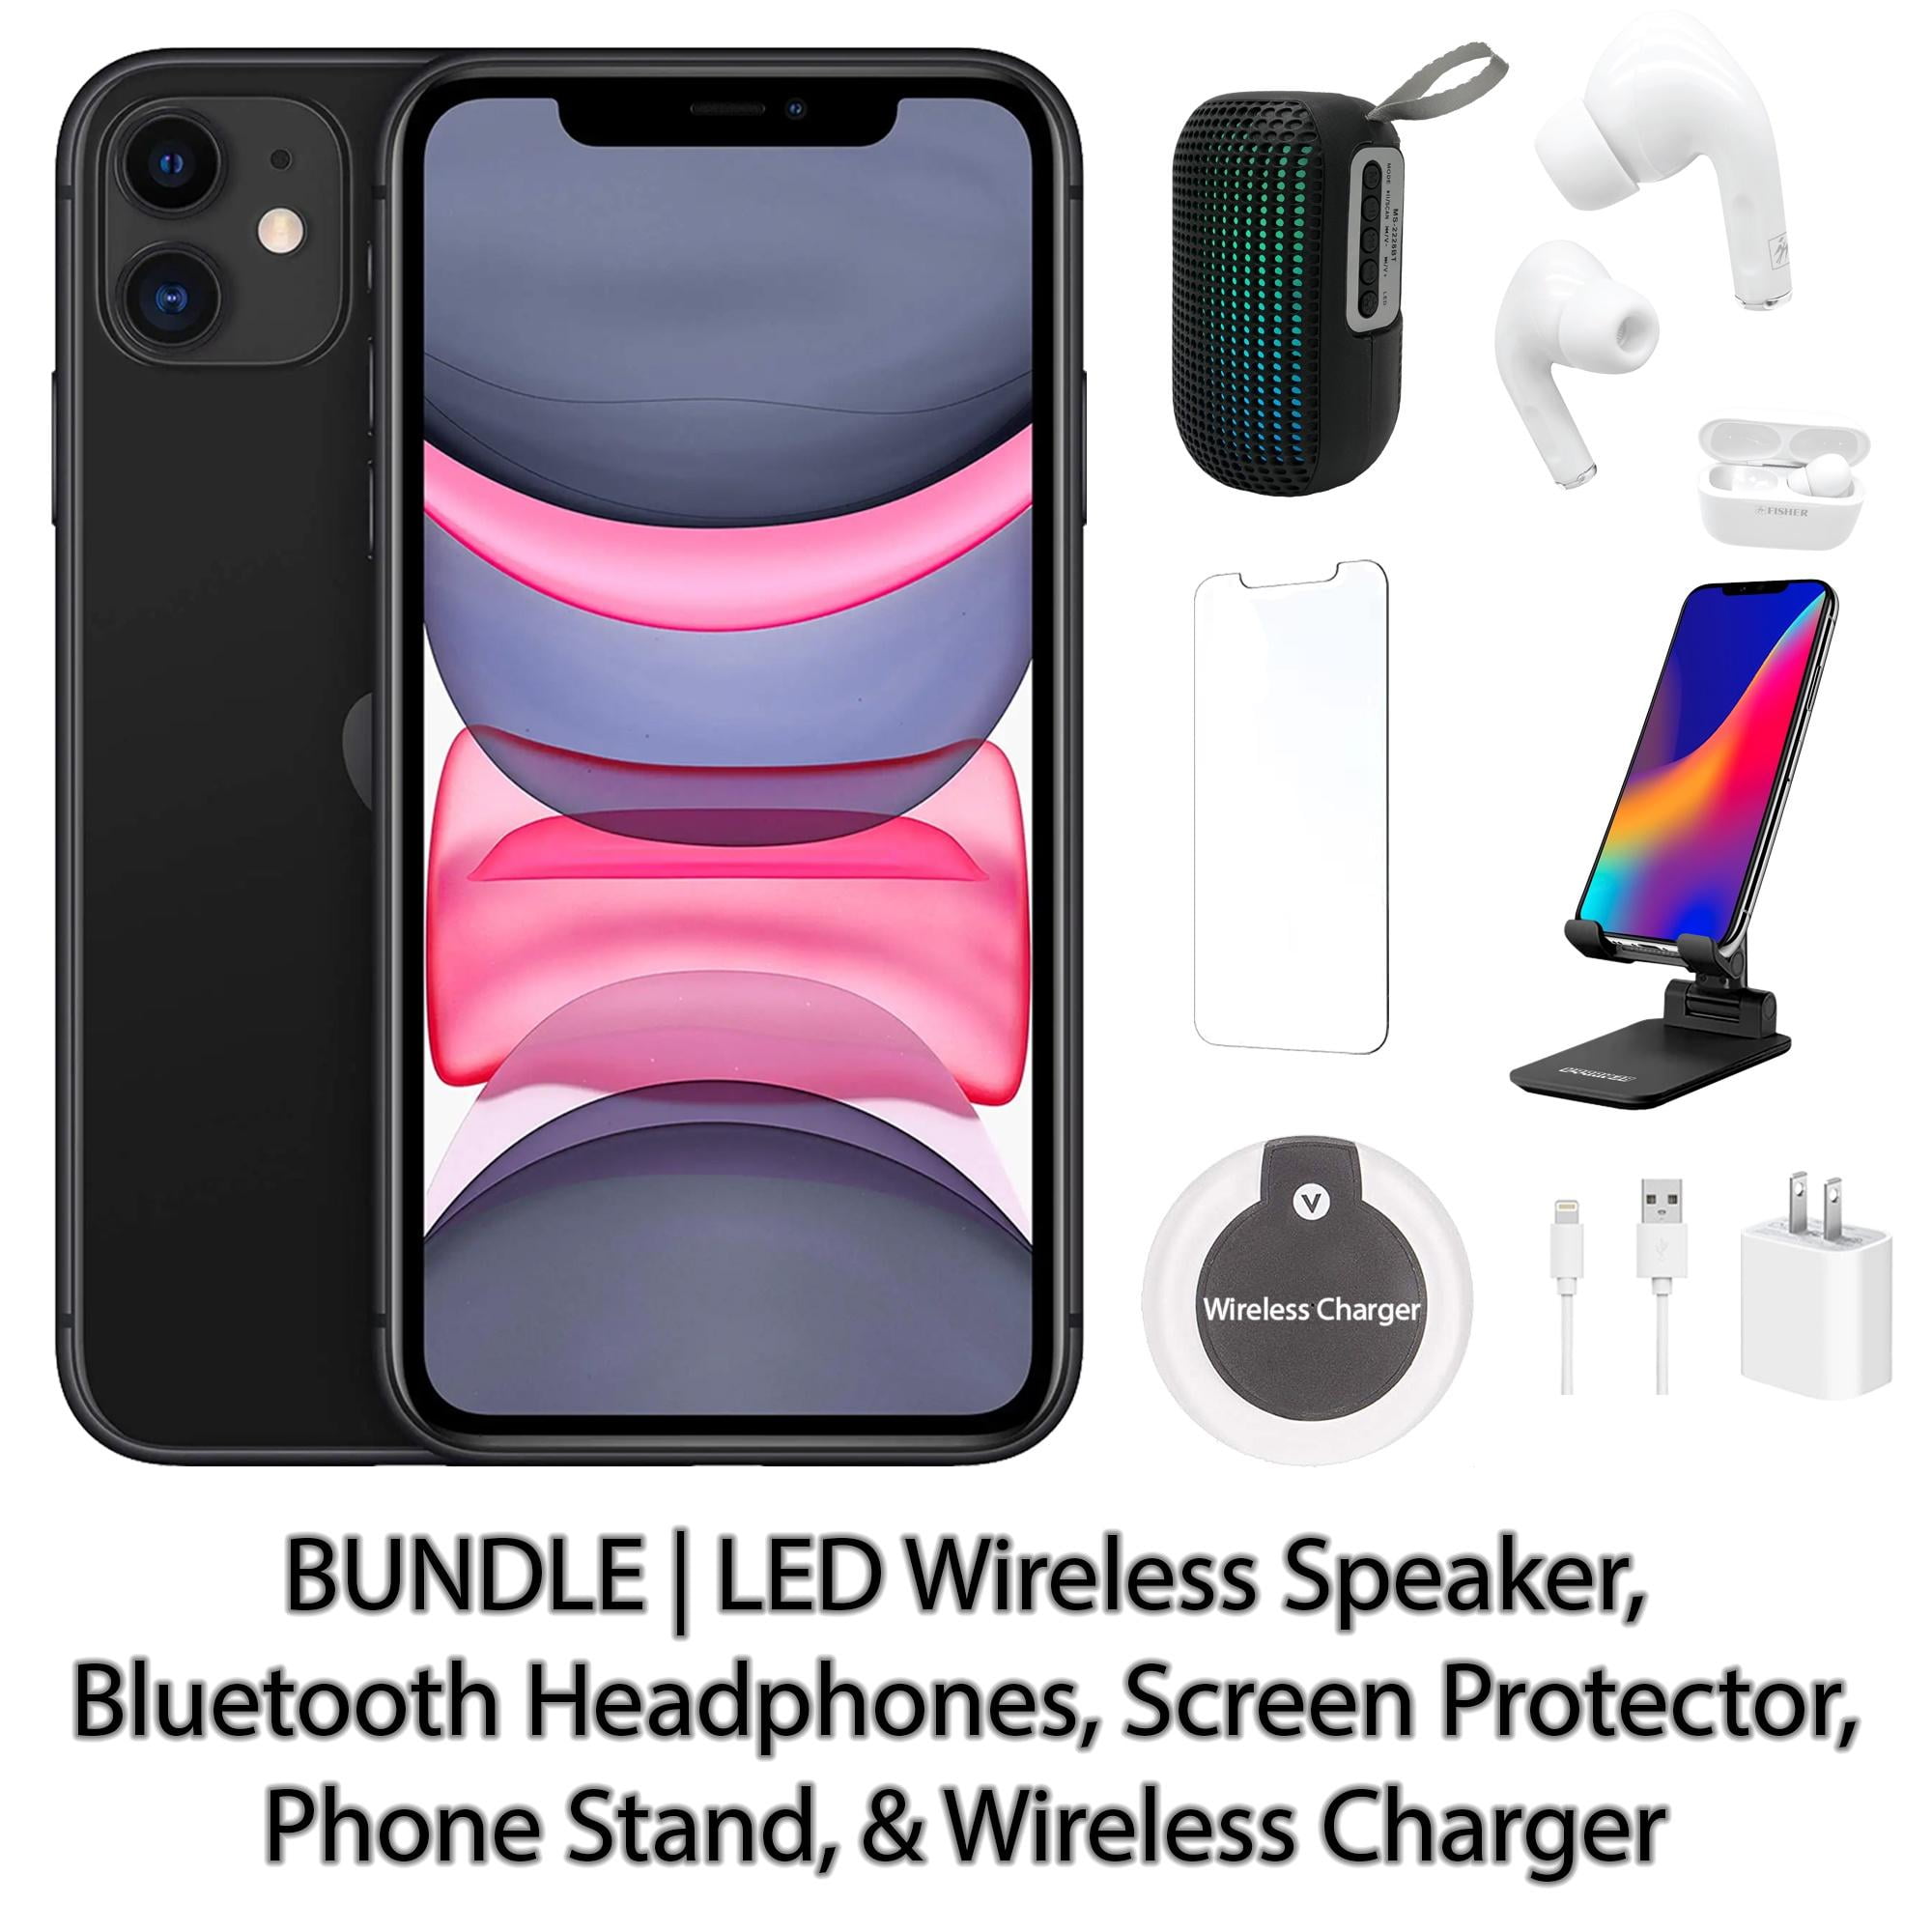 Black 11 Wireless Bluetooth 64GB LED Protector, with Fully Stand Unlocked Phone (Refurbished) Headphones, Restored Apple Charger, Screen iPhone Speaker, Wireless &